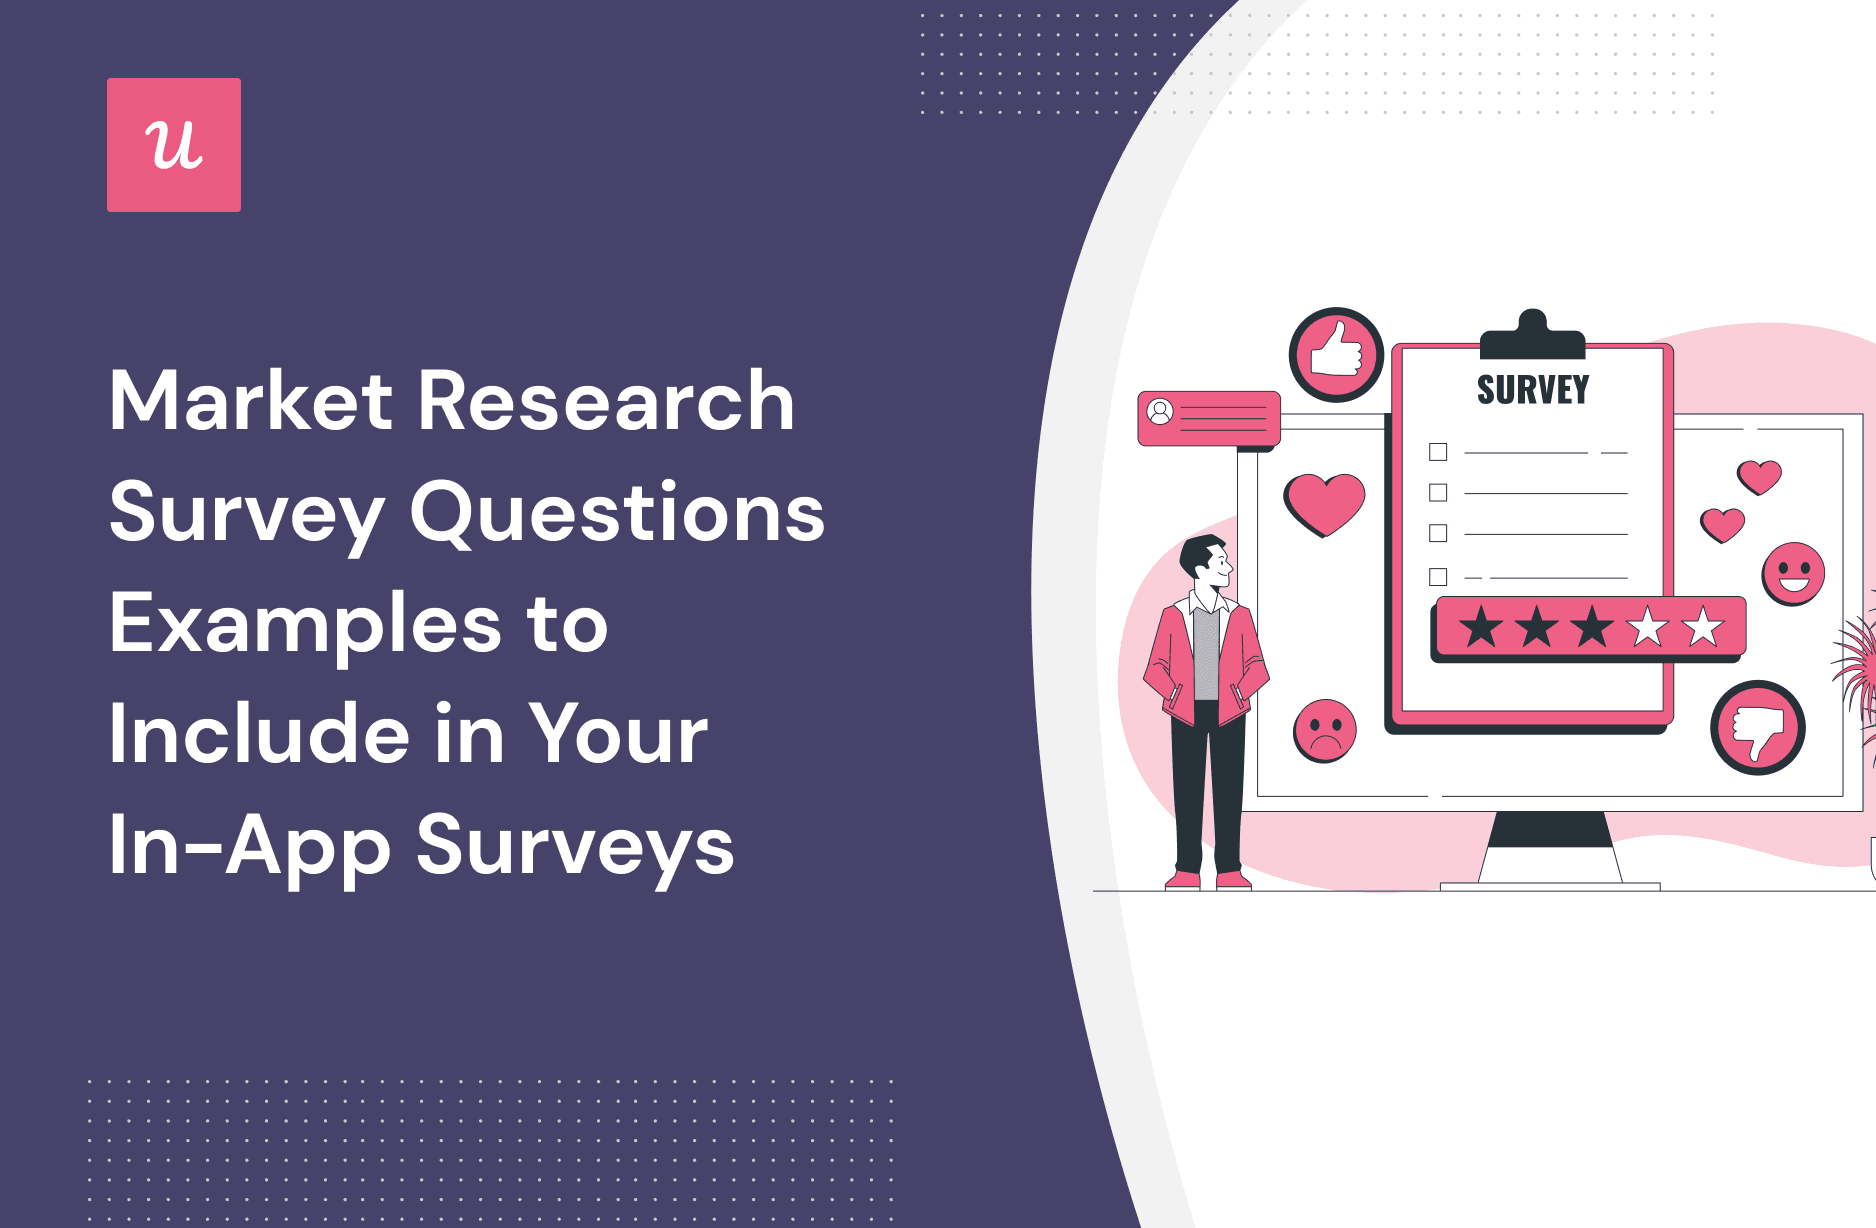 Market Research Survey Questions Examples to Include in Your In-App Surveys cover